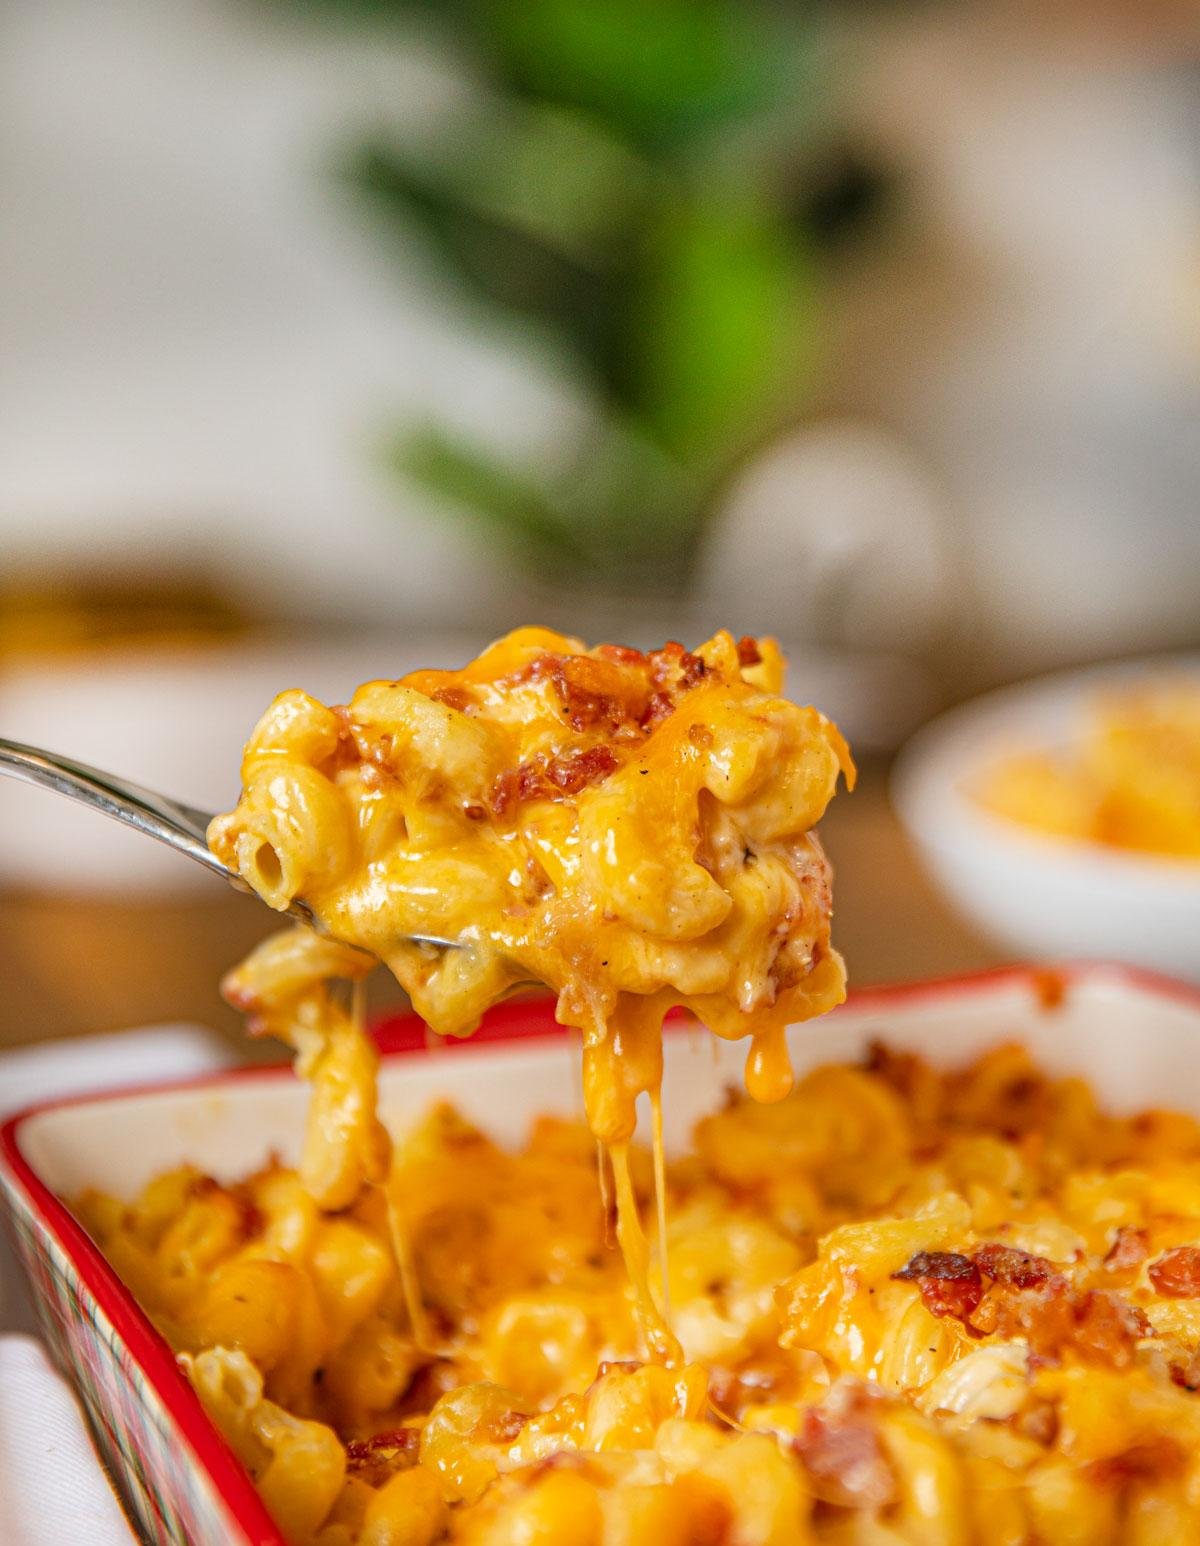 Comfort Food with a Twist: How to Make Creamy Mac and Cheese with Crispy Bacon Topping